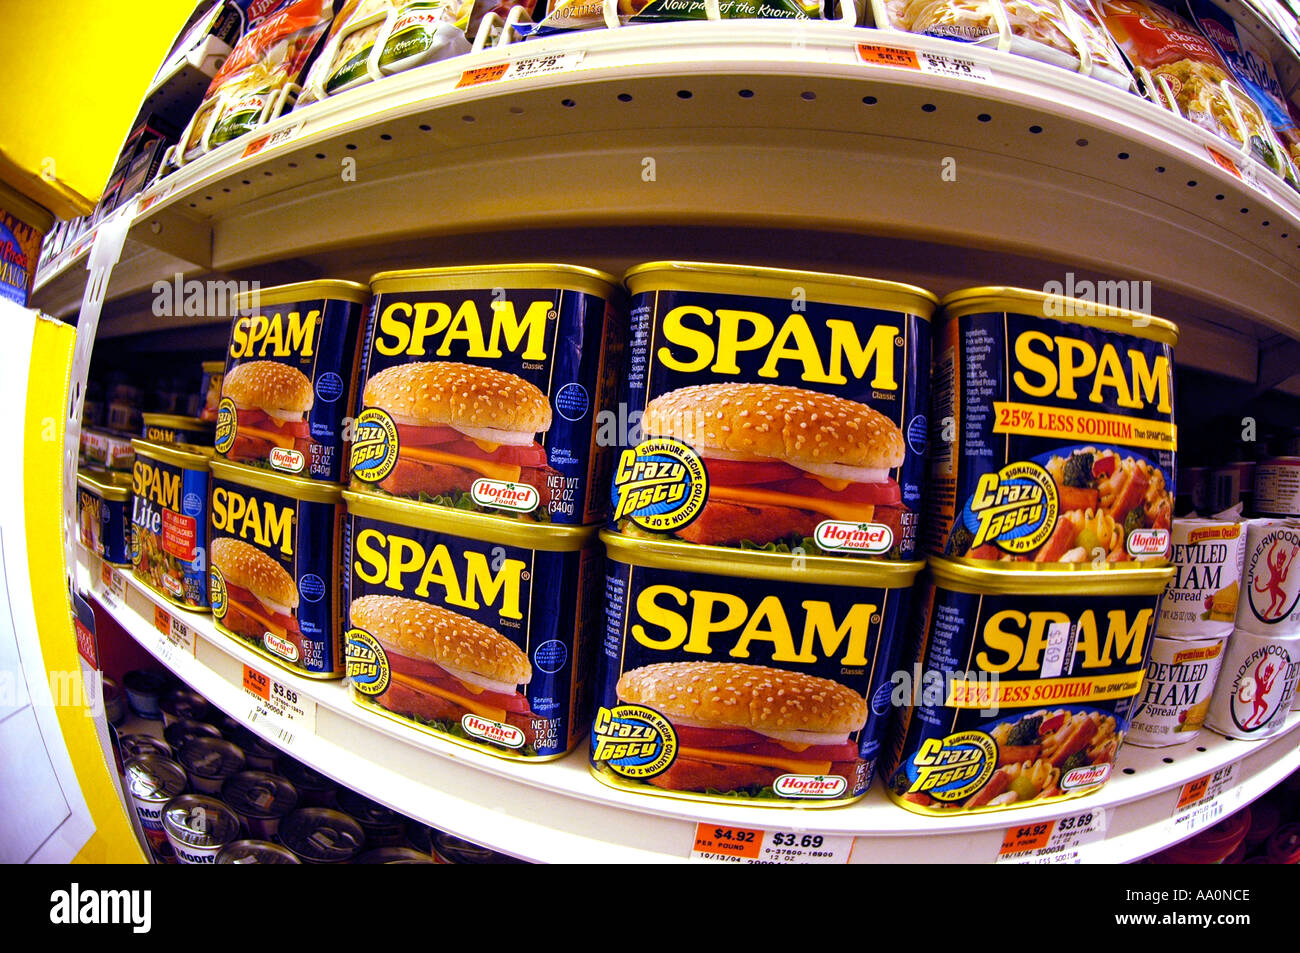 Cans of Spam by Hormel are seen on a supermarket shelf  Stock Photo